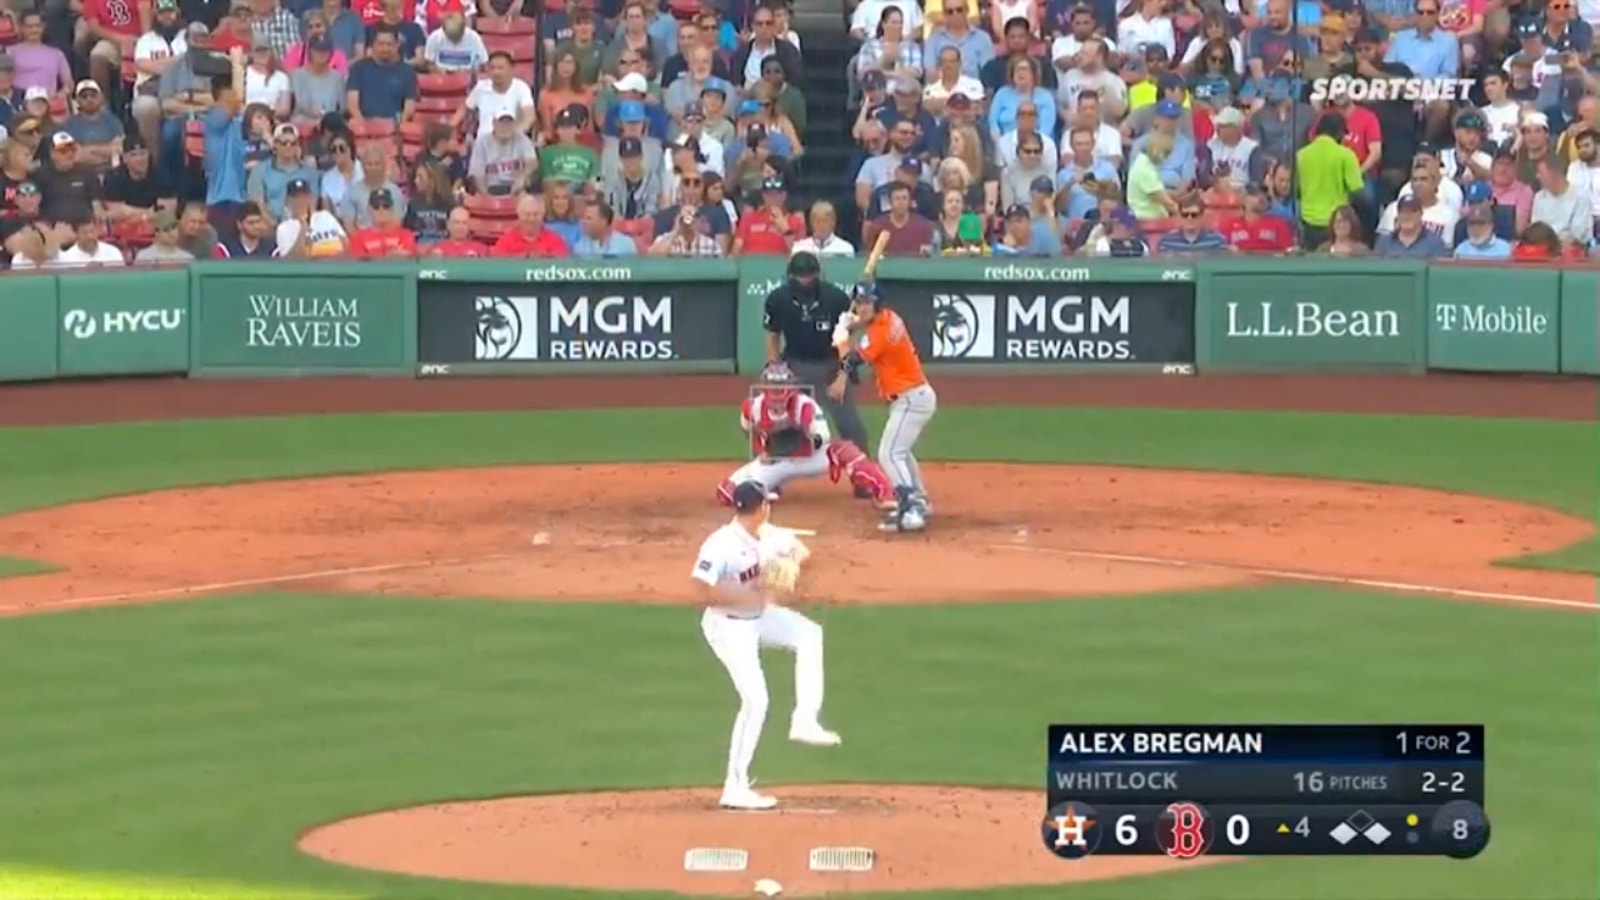 Highlights from Astros' 7-4 win over Red Sox